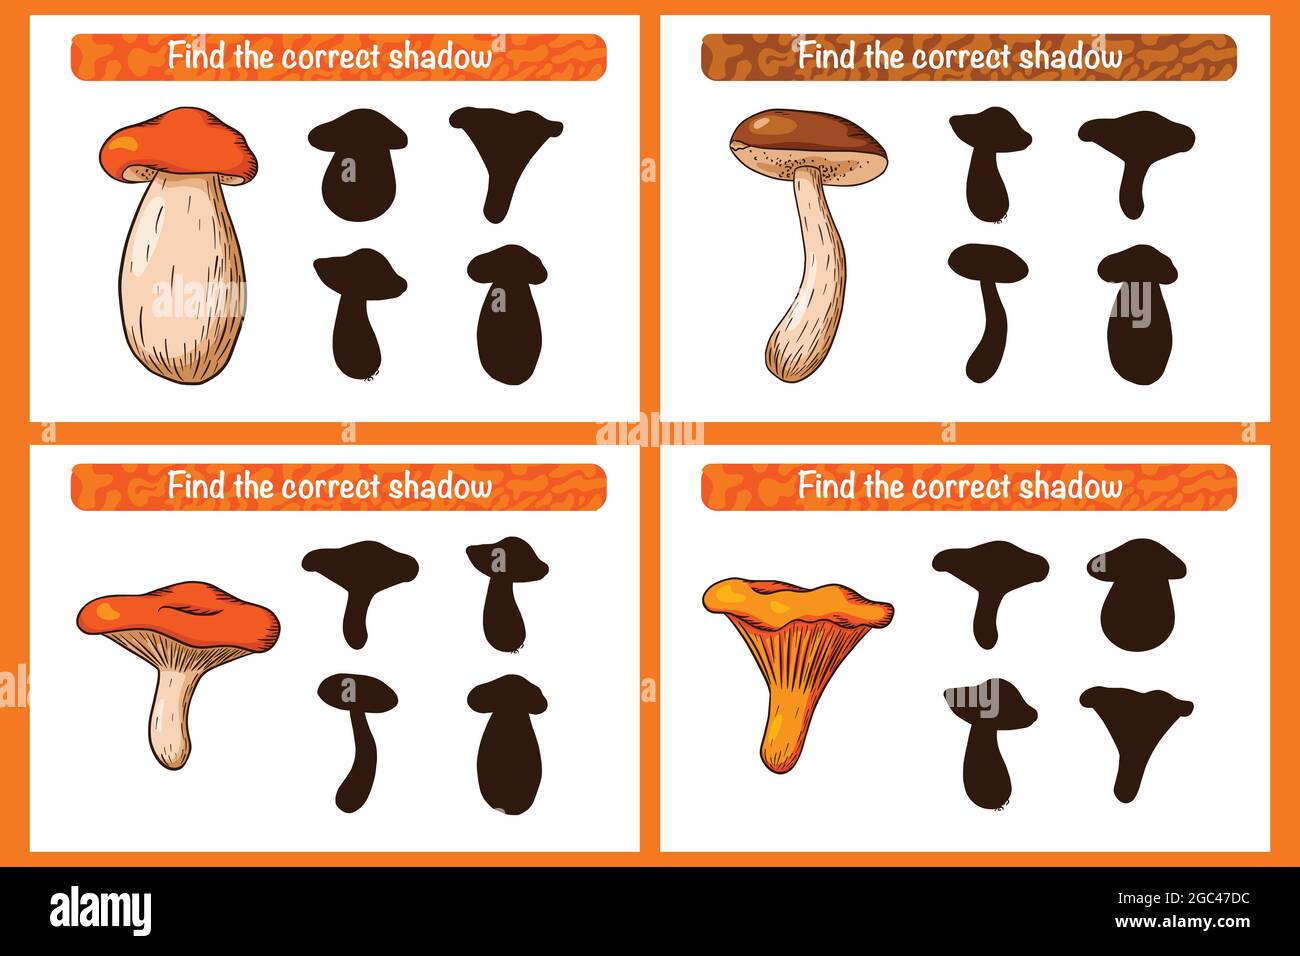 Find correct Mushroom shadow educational game for kids. Shadow matching activity for children with mushrooms. Preschool puzzle. Educational worksheet. FInd the correct silhouette game with edible mushrooms. Premium Vector Stock Vector